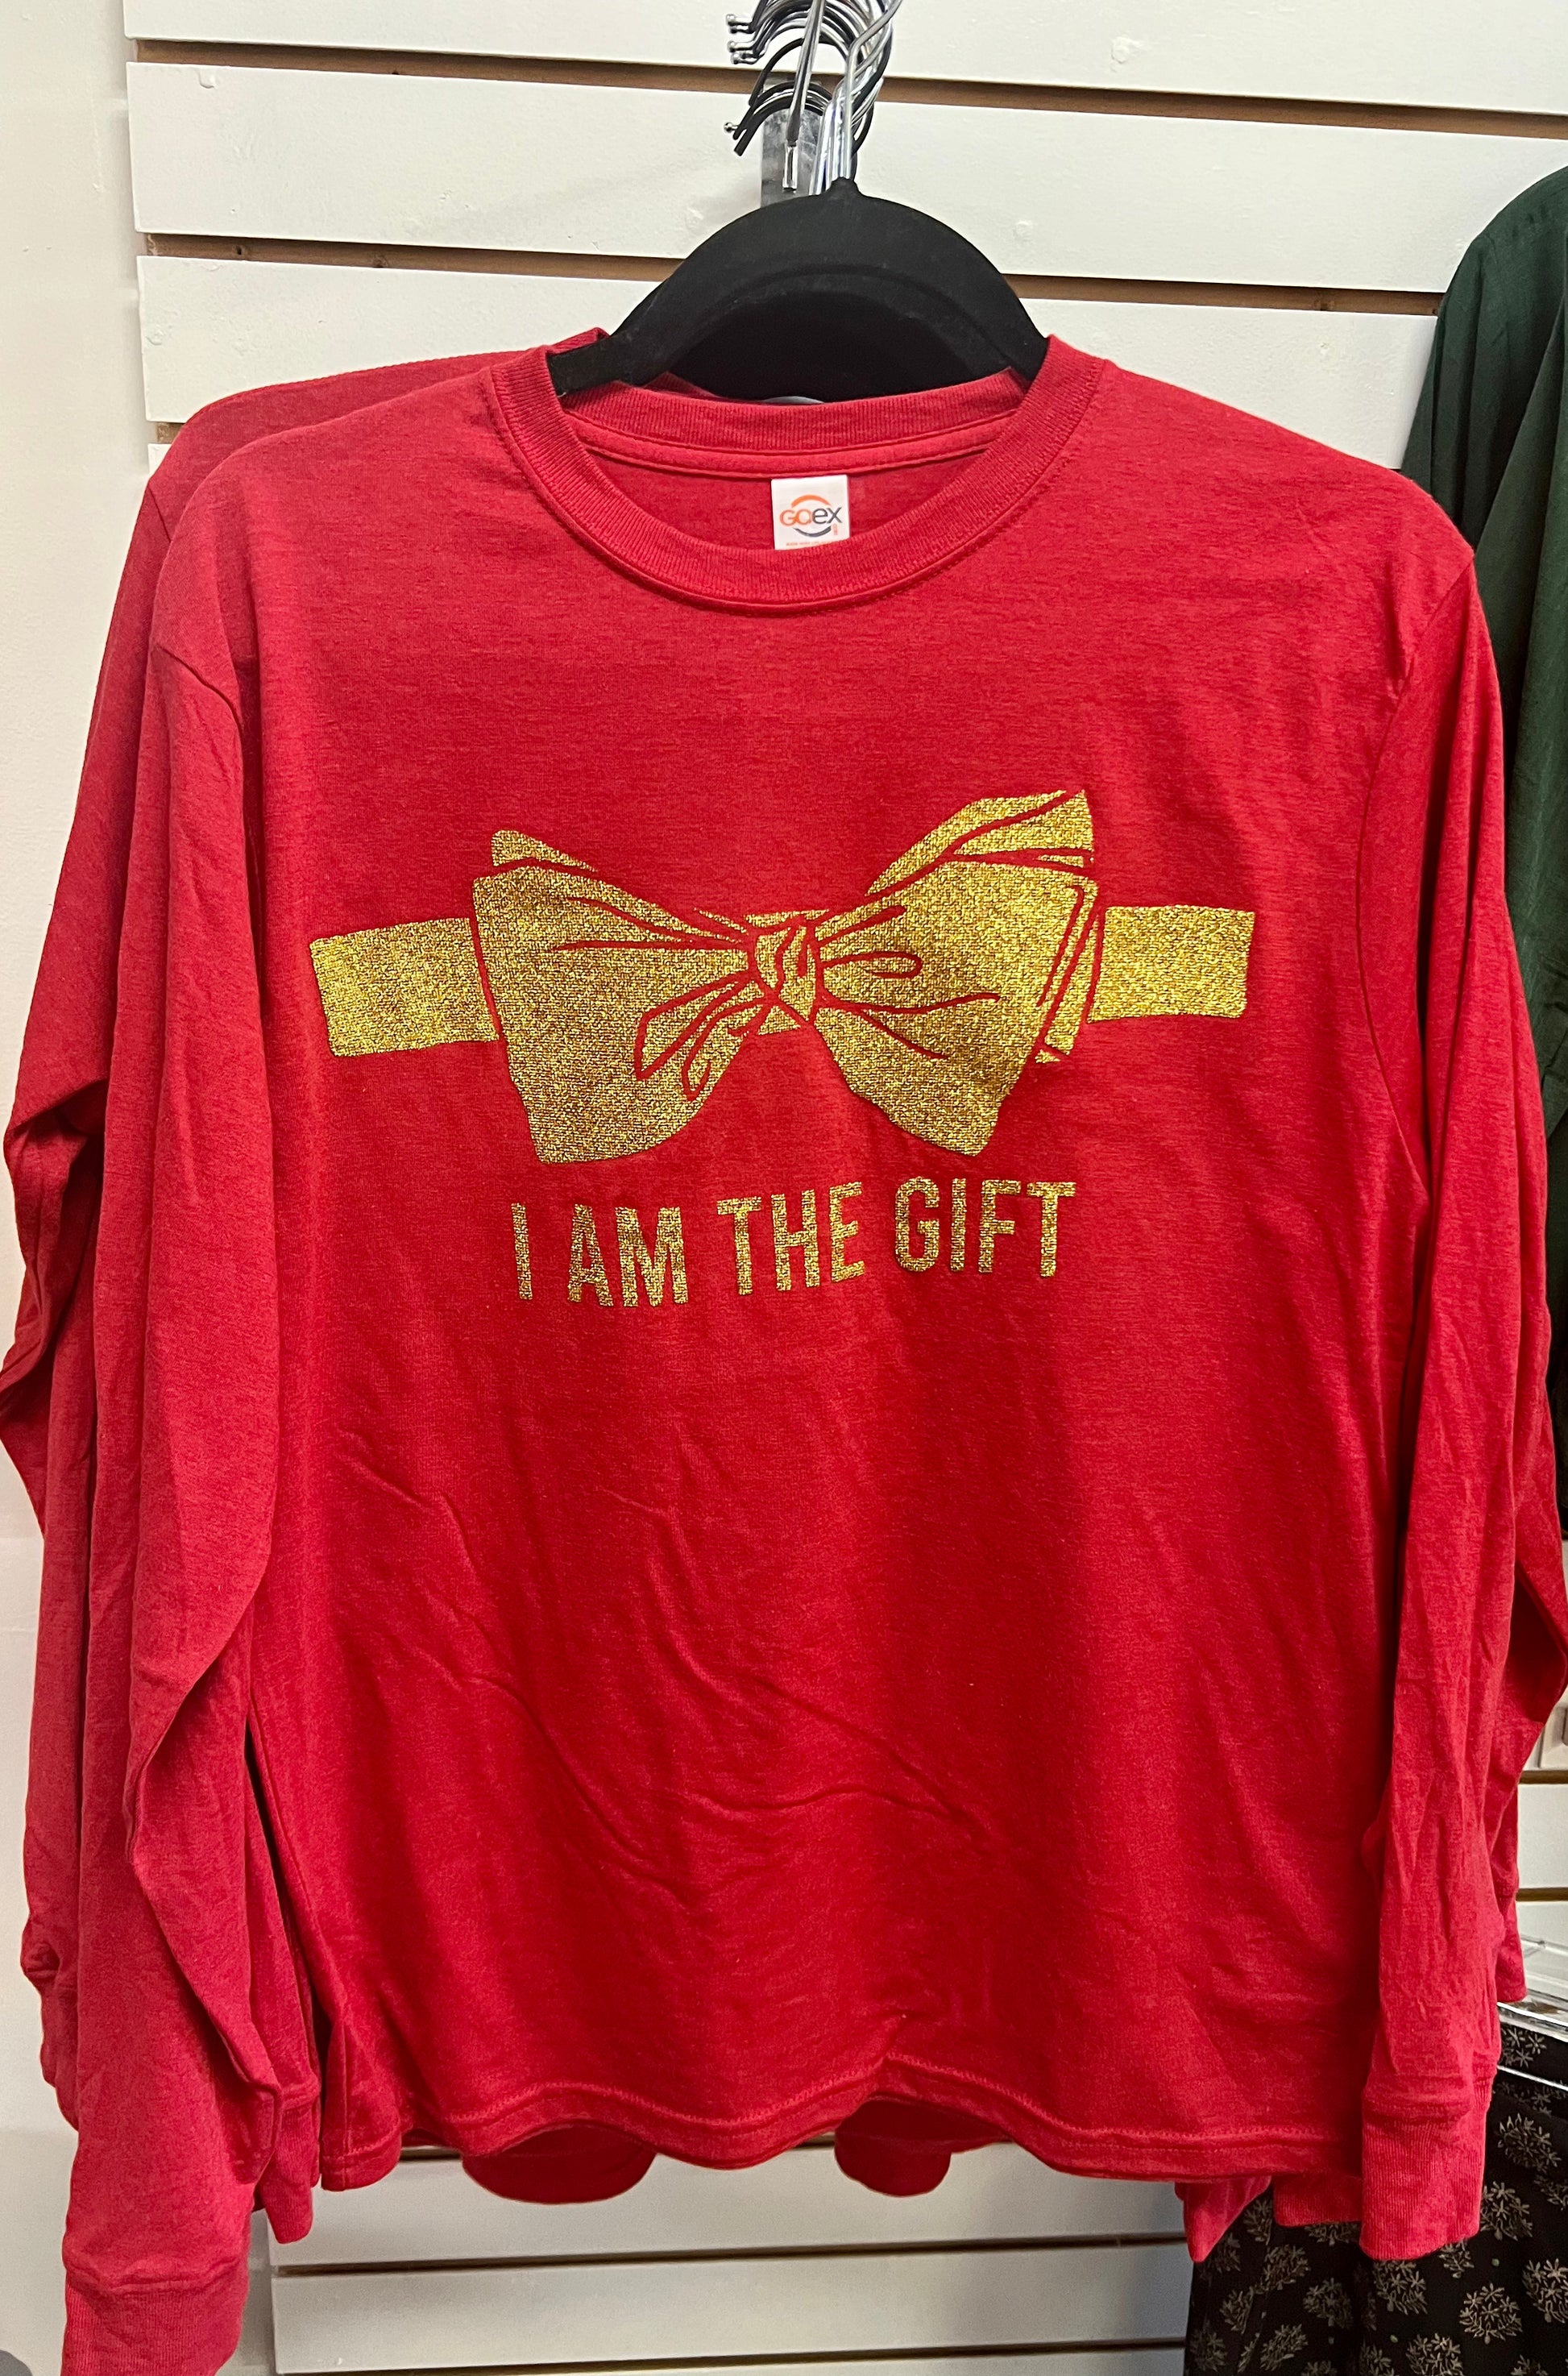 I am the Gift - Unisex Triblend Long Sleeve Tee Shirts GOEX Apparel   